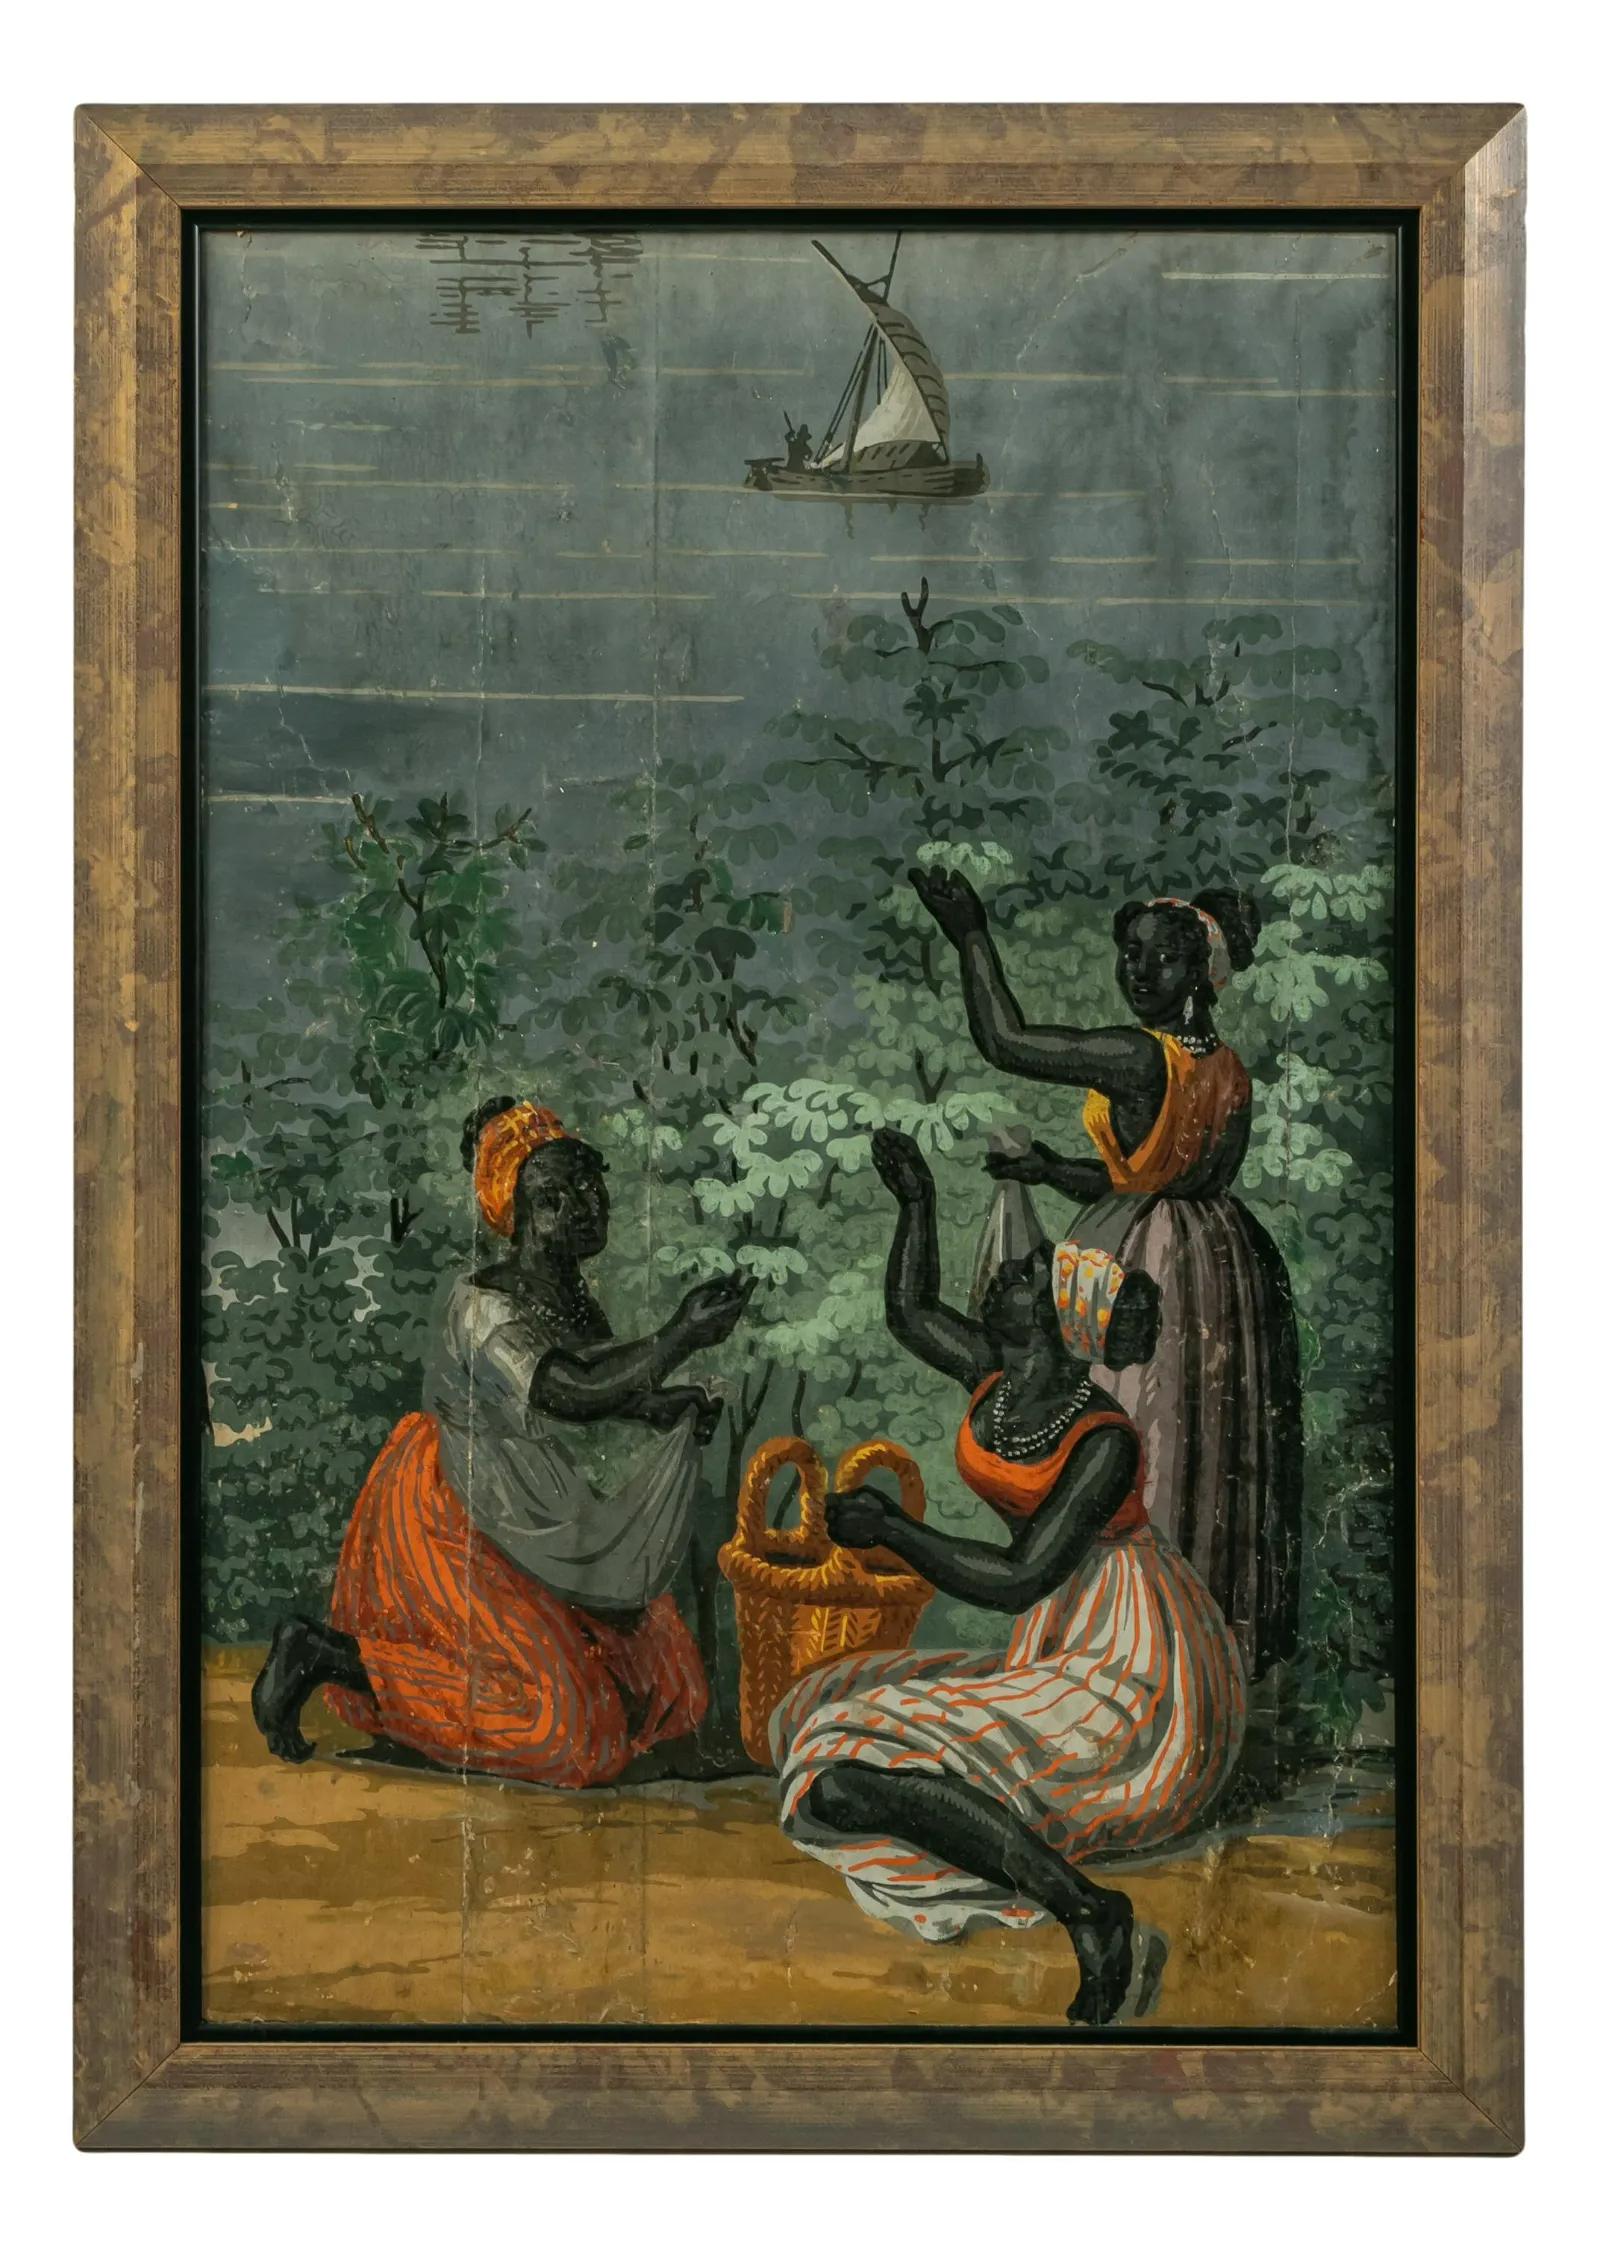 A charming and early wallpaper scene of Nubian women collecting fruit in baskets, likely Zuber, late 18th century, printed and hand colored, now framed an mounted to artist board.